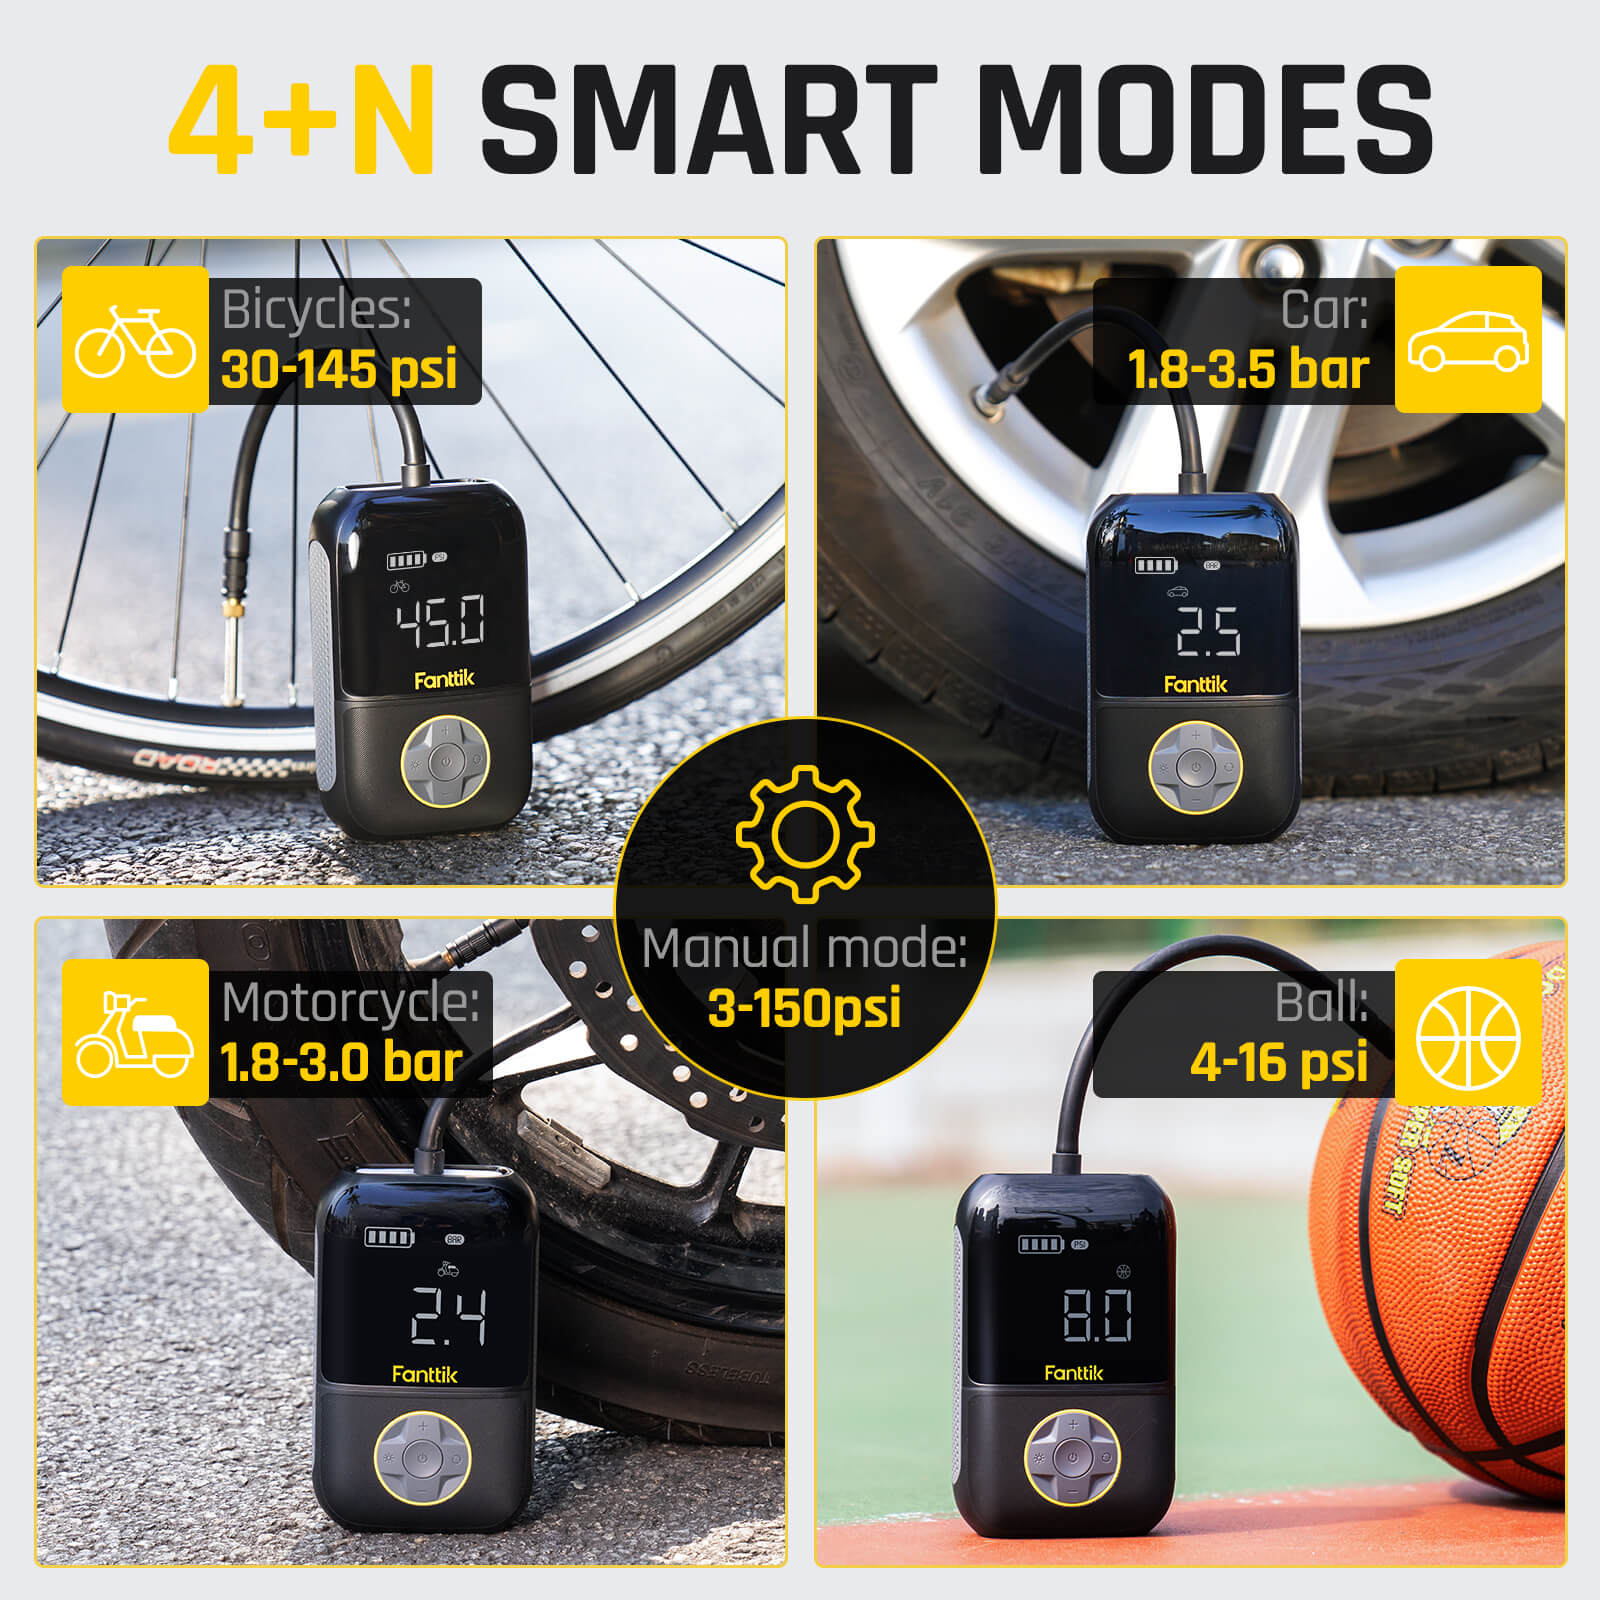 4 types of preset inflation modes are clearly displayed on the large LED screen, convenient for you to choose. The manual mode allows you to set pressure value according to the inflation object and the inflation stops automatically at the set pressure. 